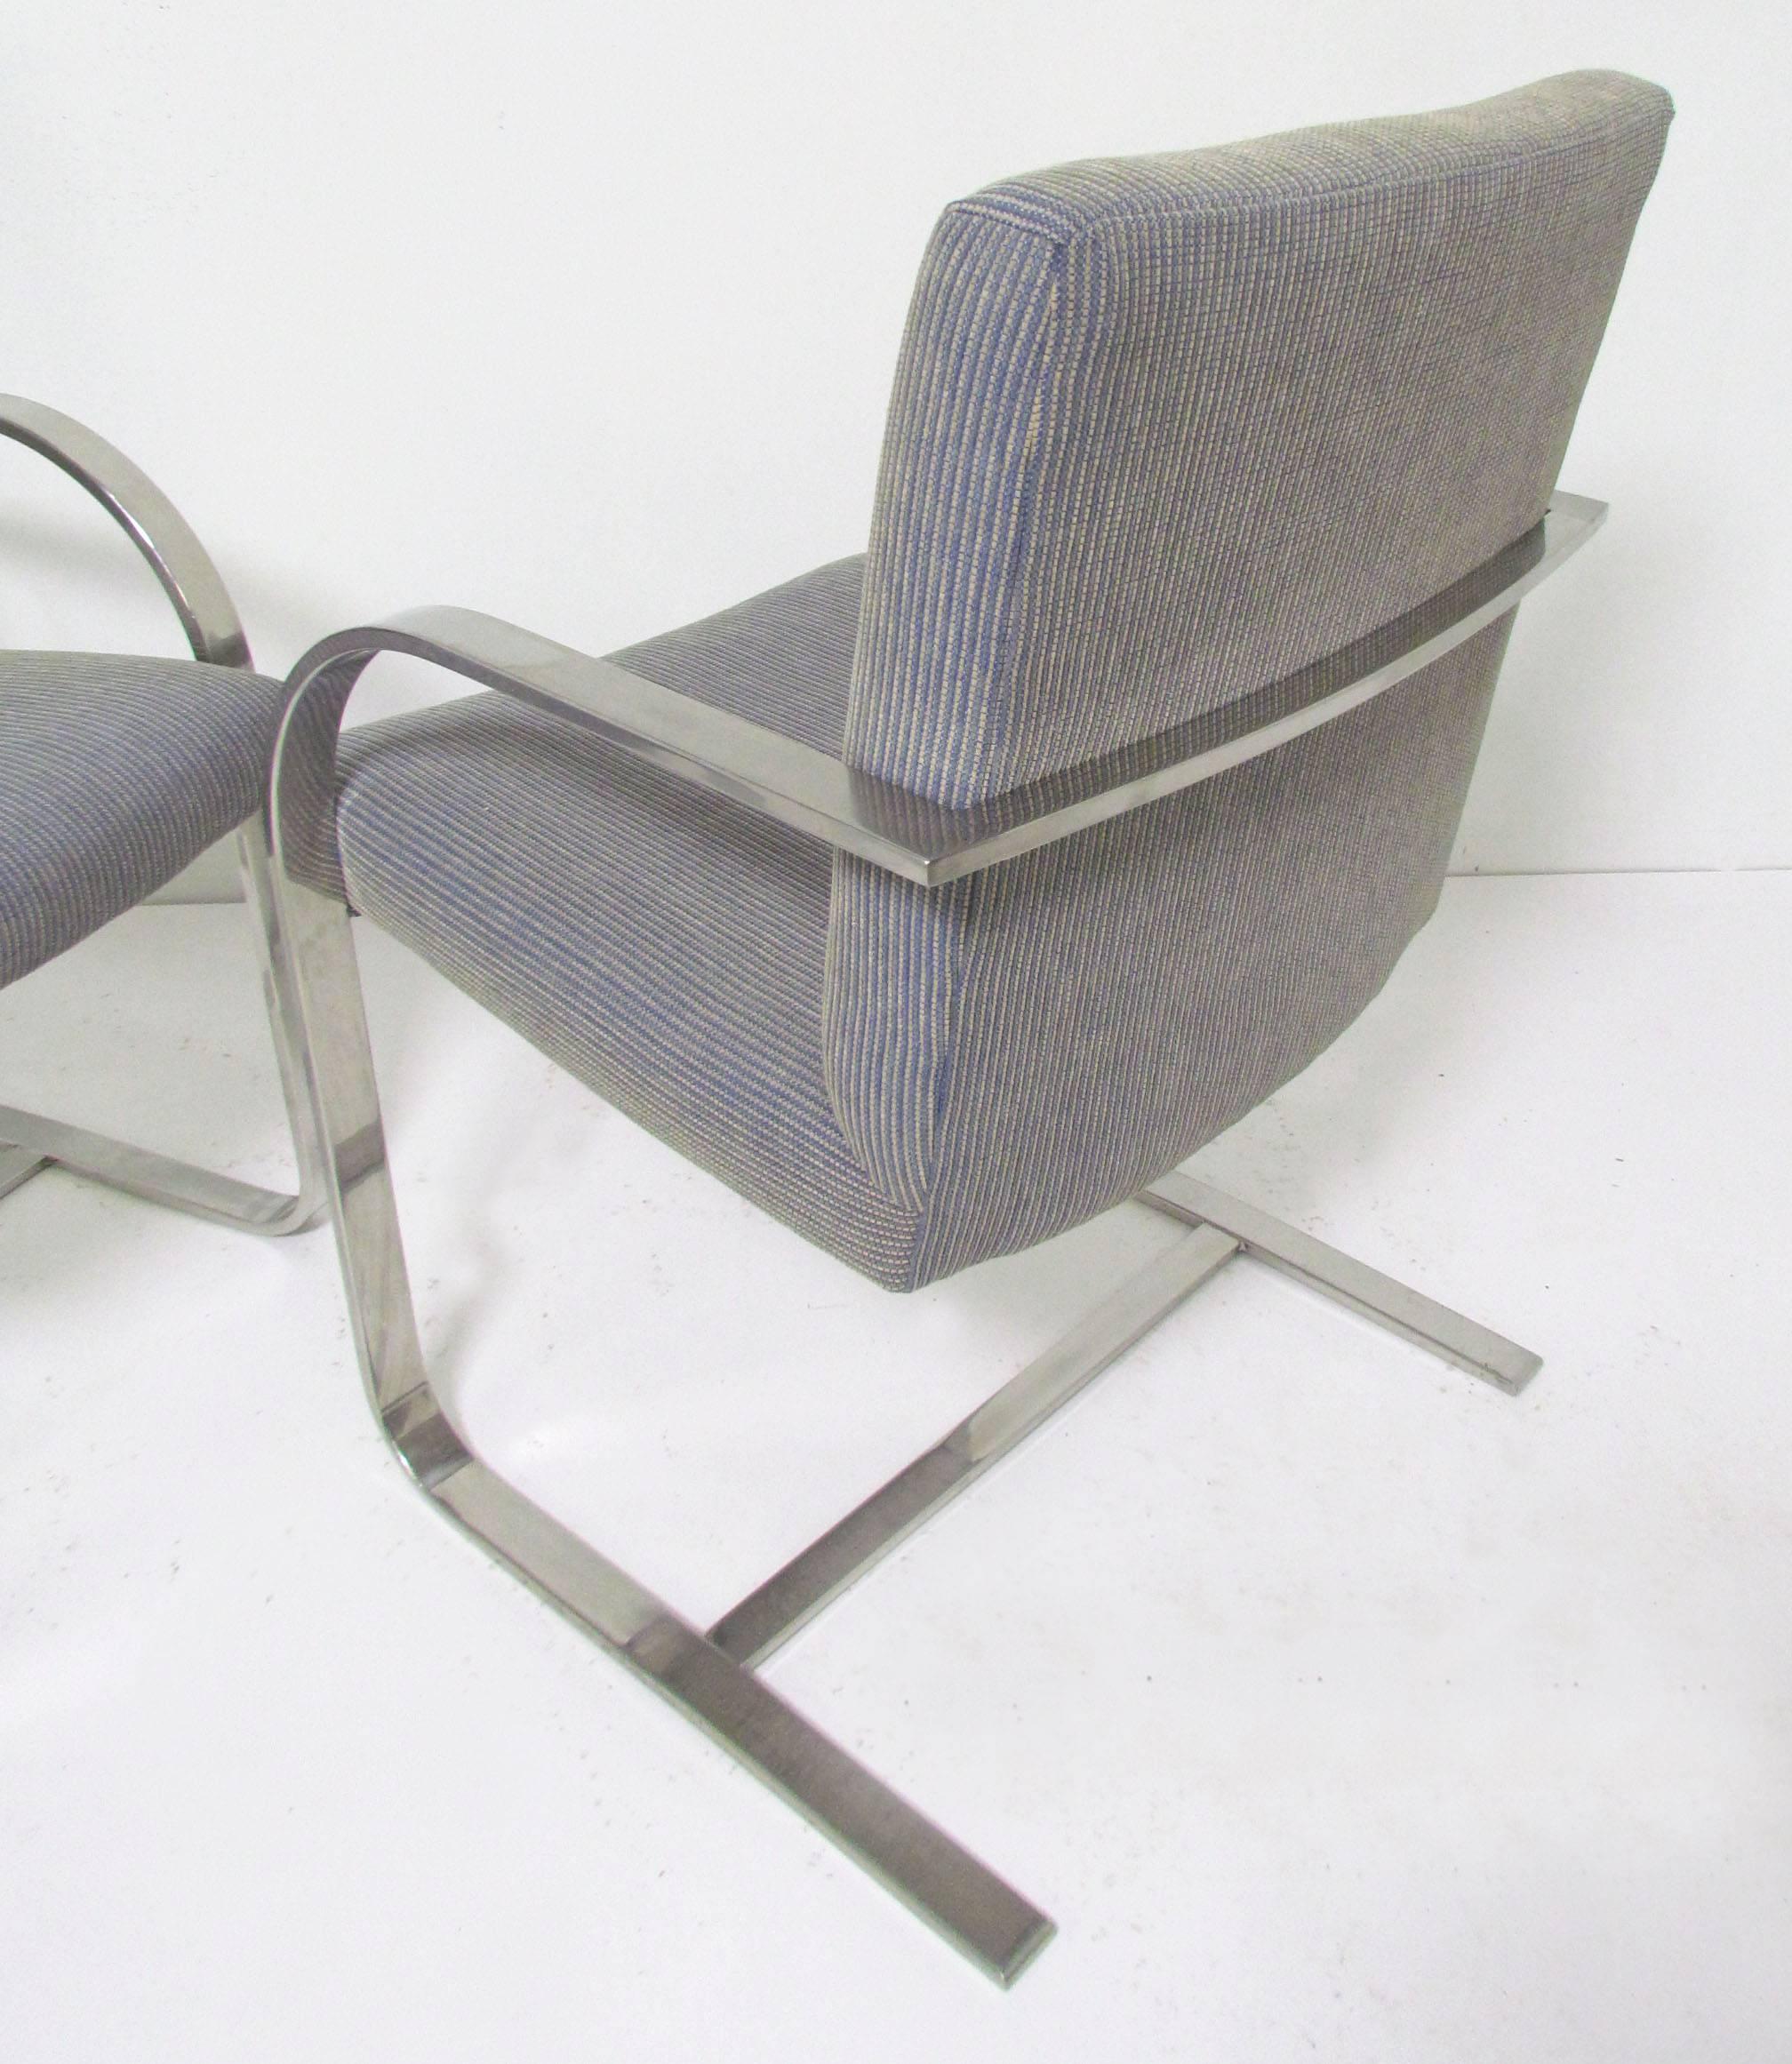 American Set of Four Flat Bar Chrome Brno Chairs, Style of Mies Van Der Rohe